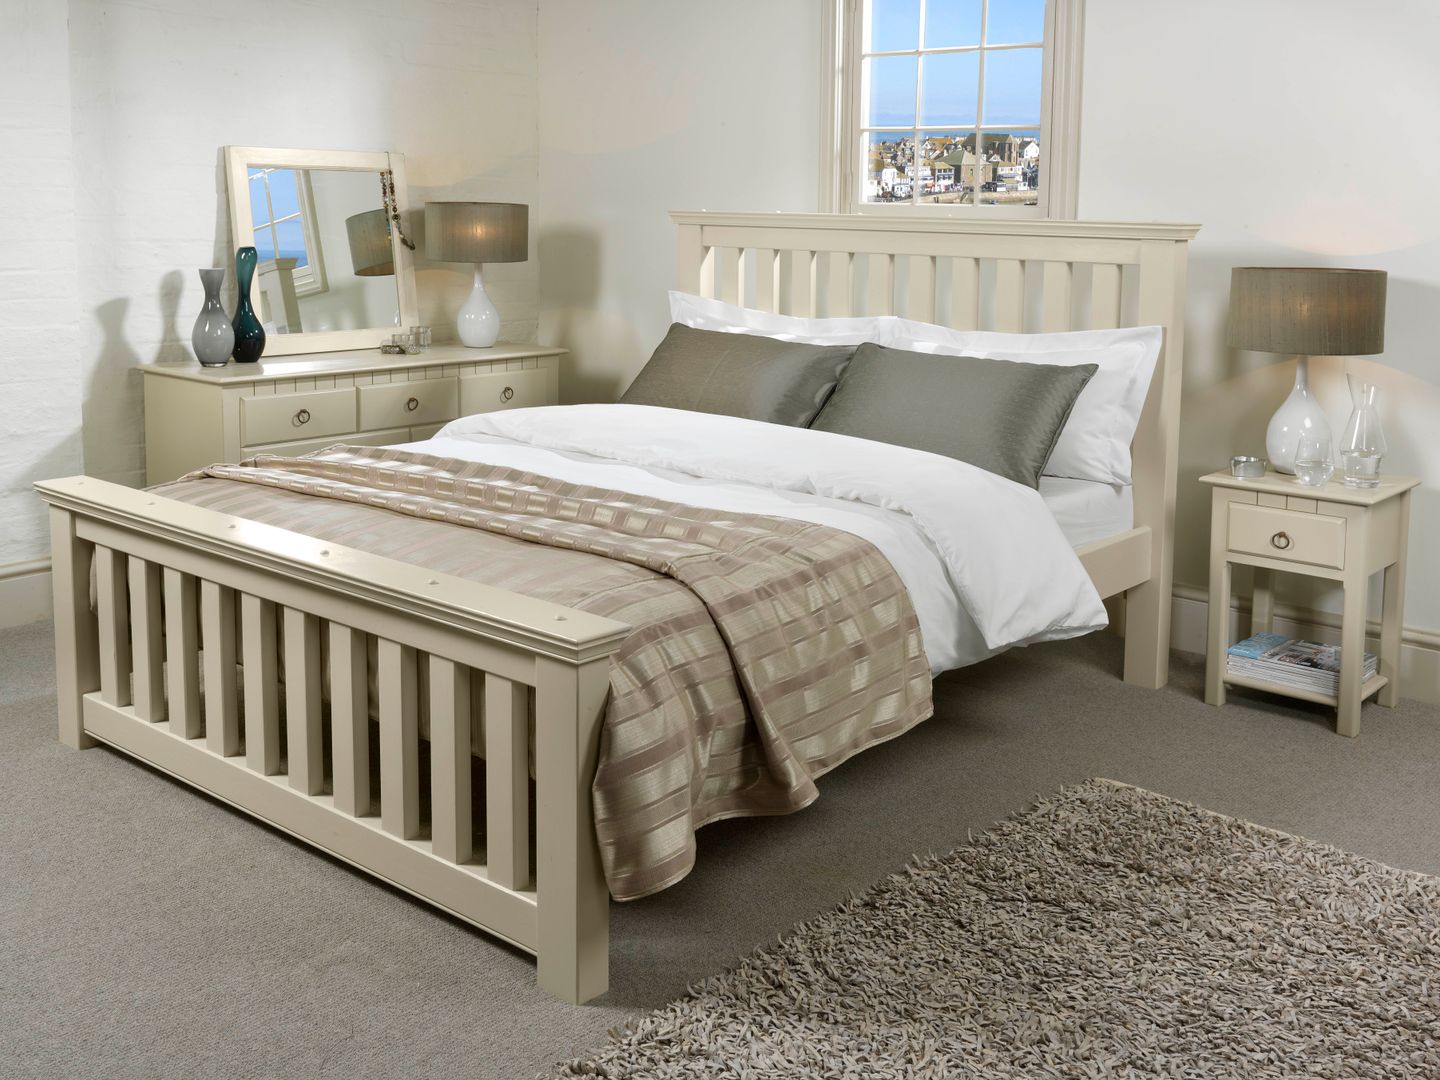 The Maine New England Bed Revival Beds Modern style bedroom Beds & headboards